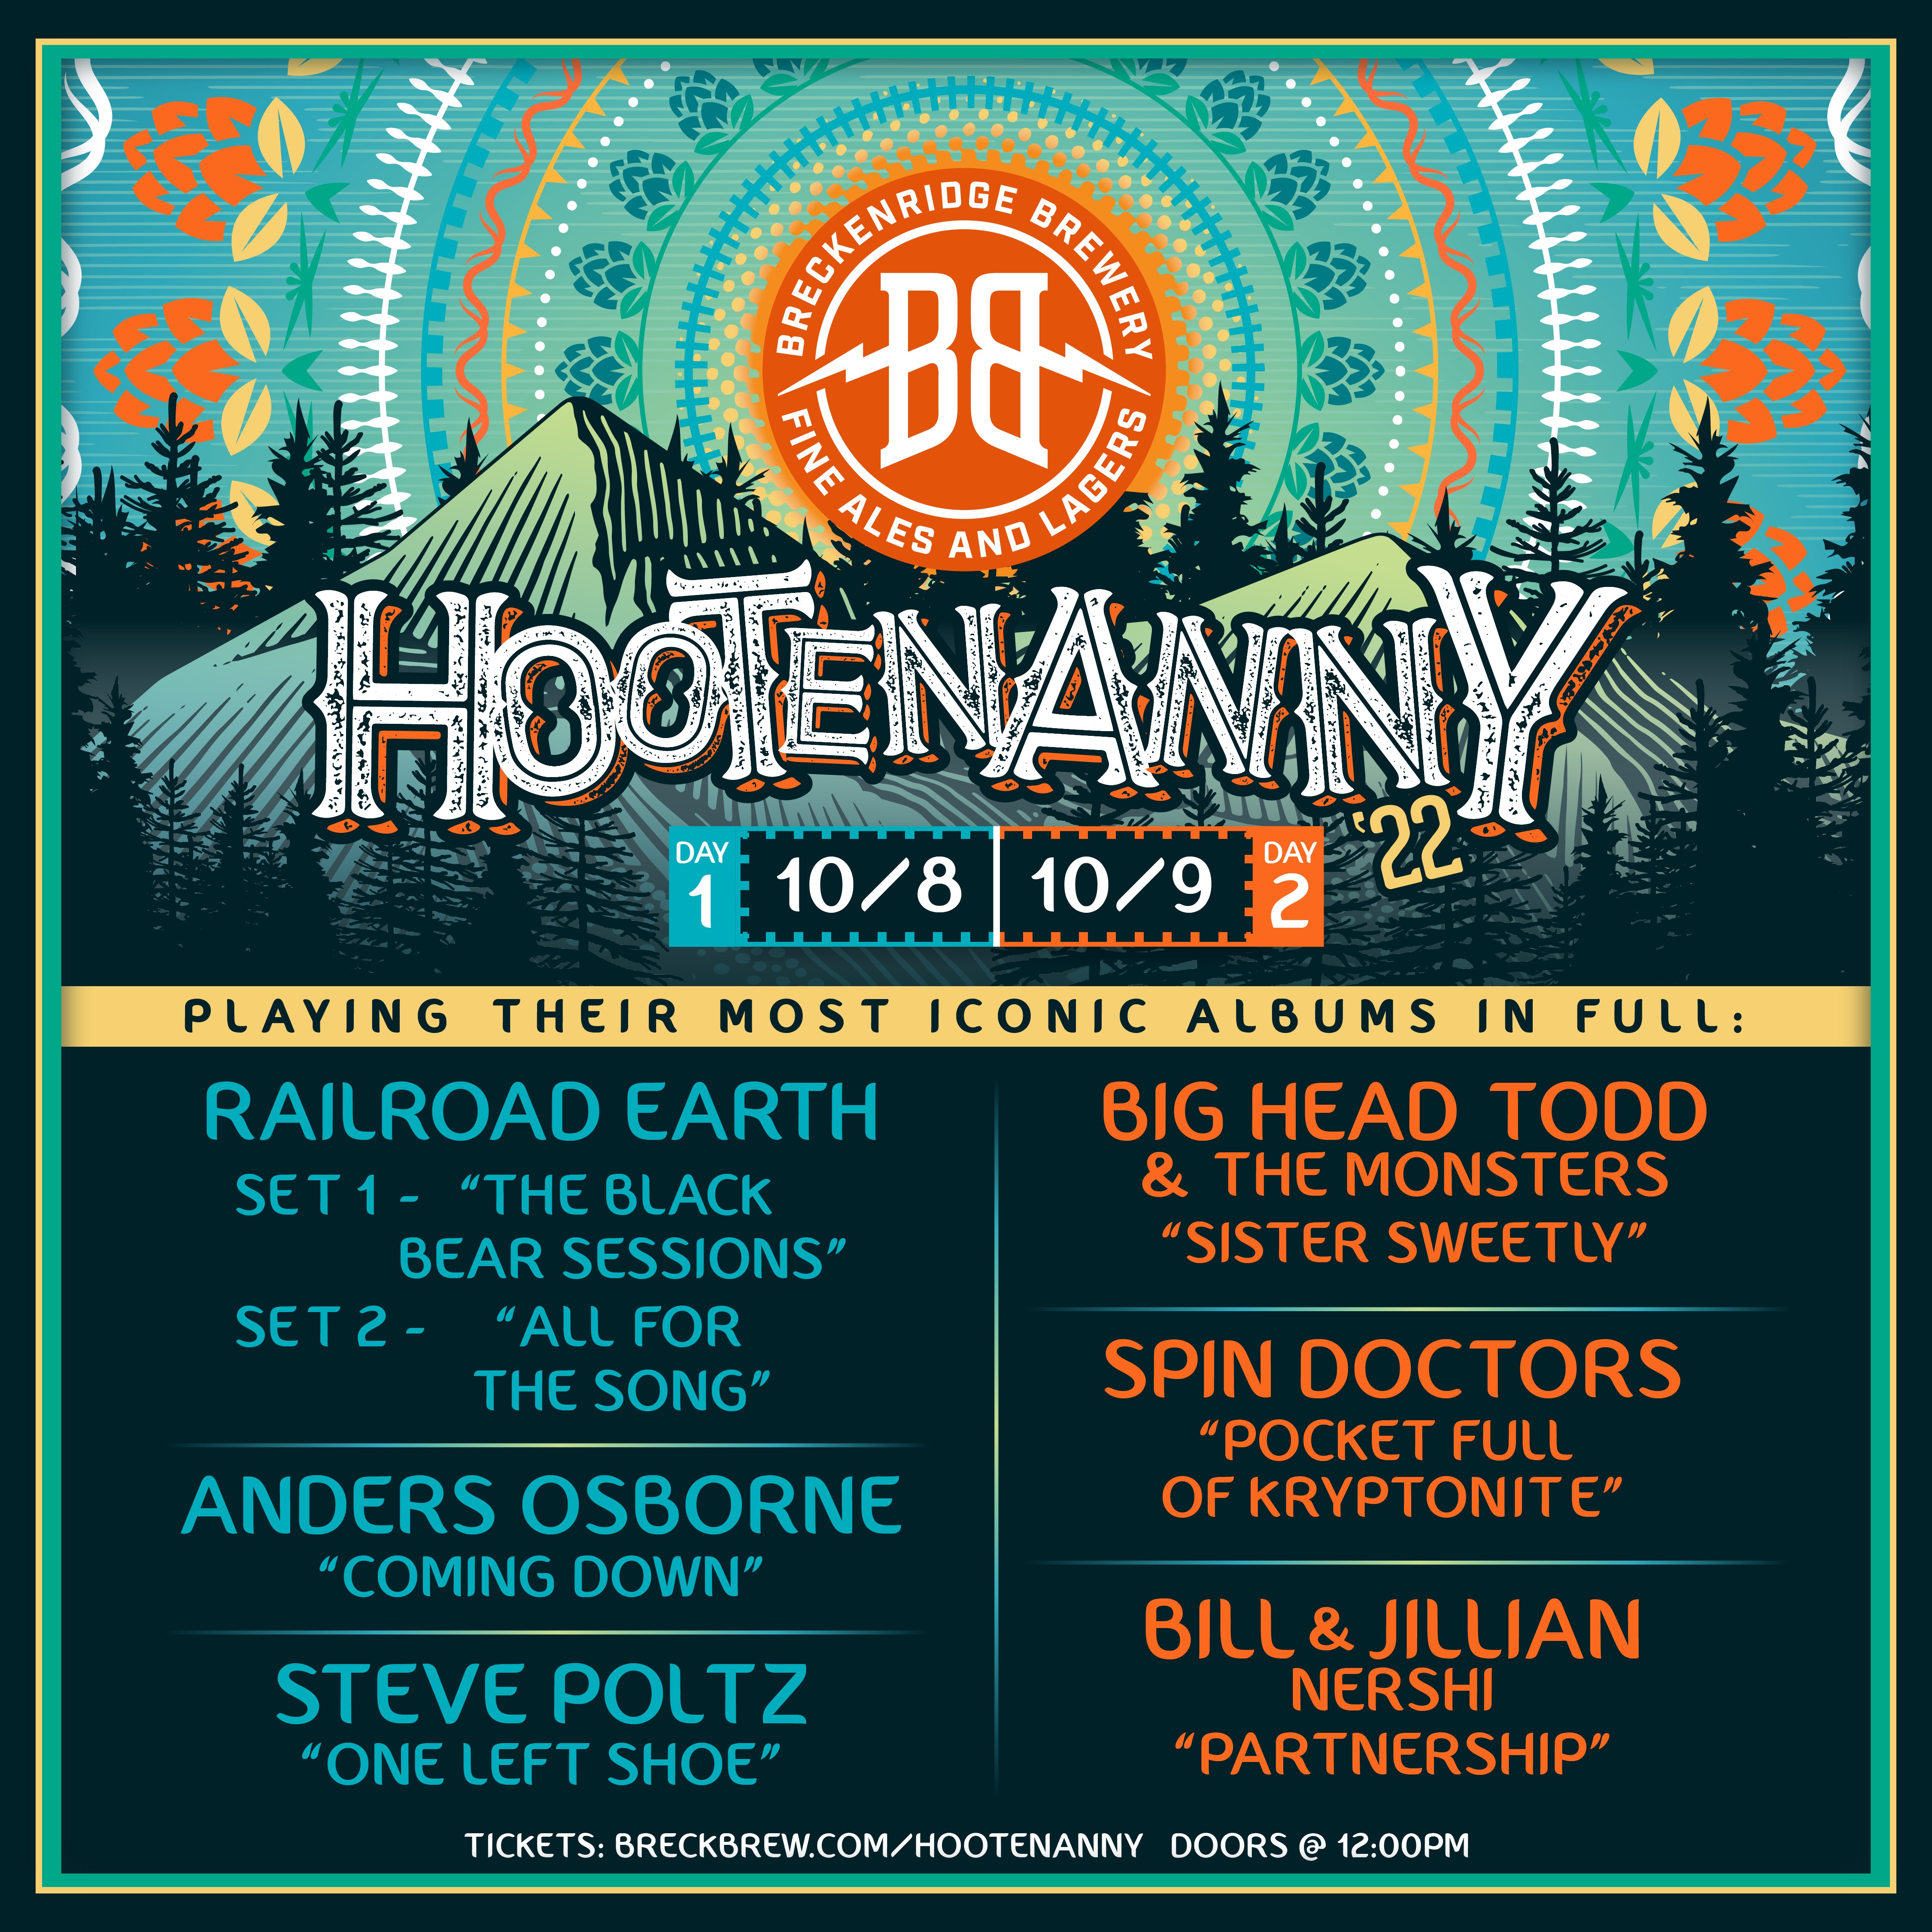 BRECKENRIDGE BREWERY IS SET TO HOST ITS ANNUAL HOOTENANNY FESTIVAL